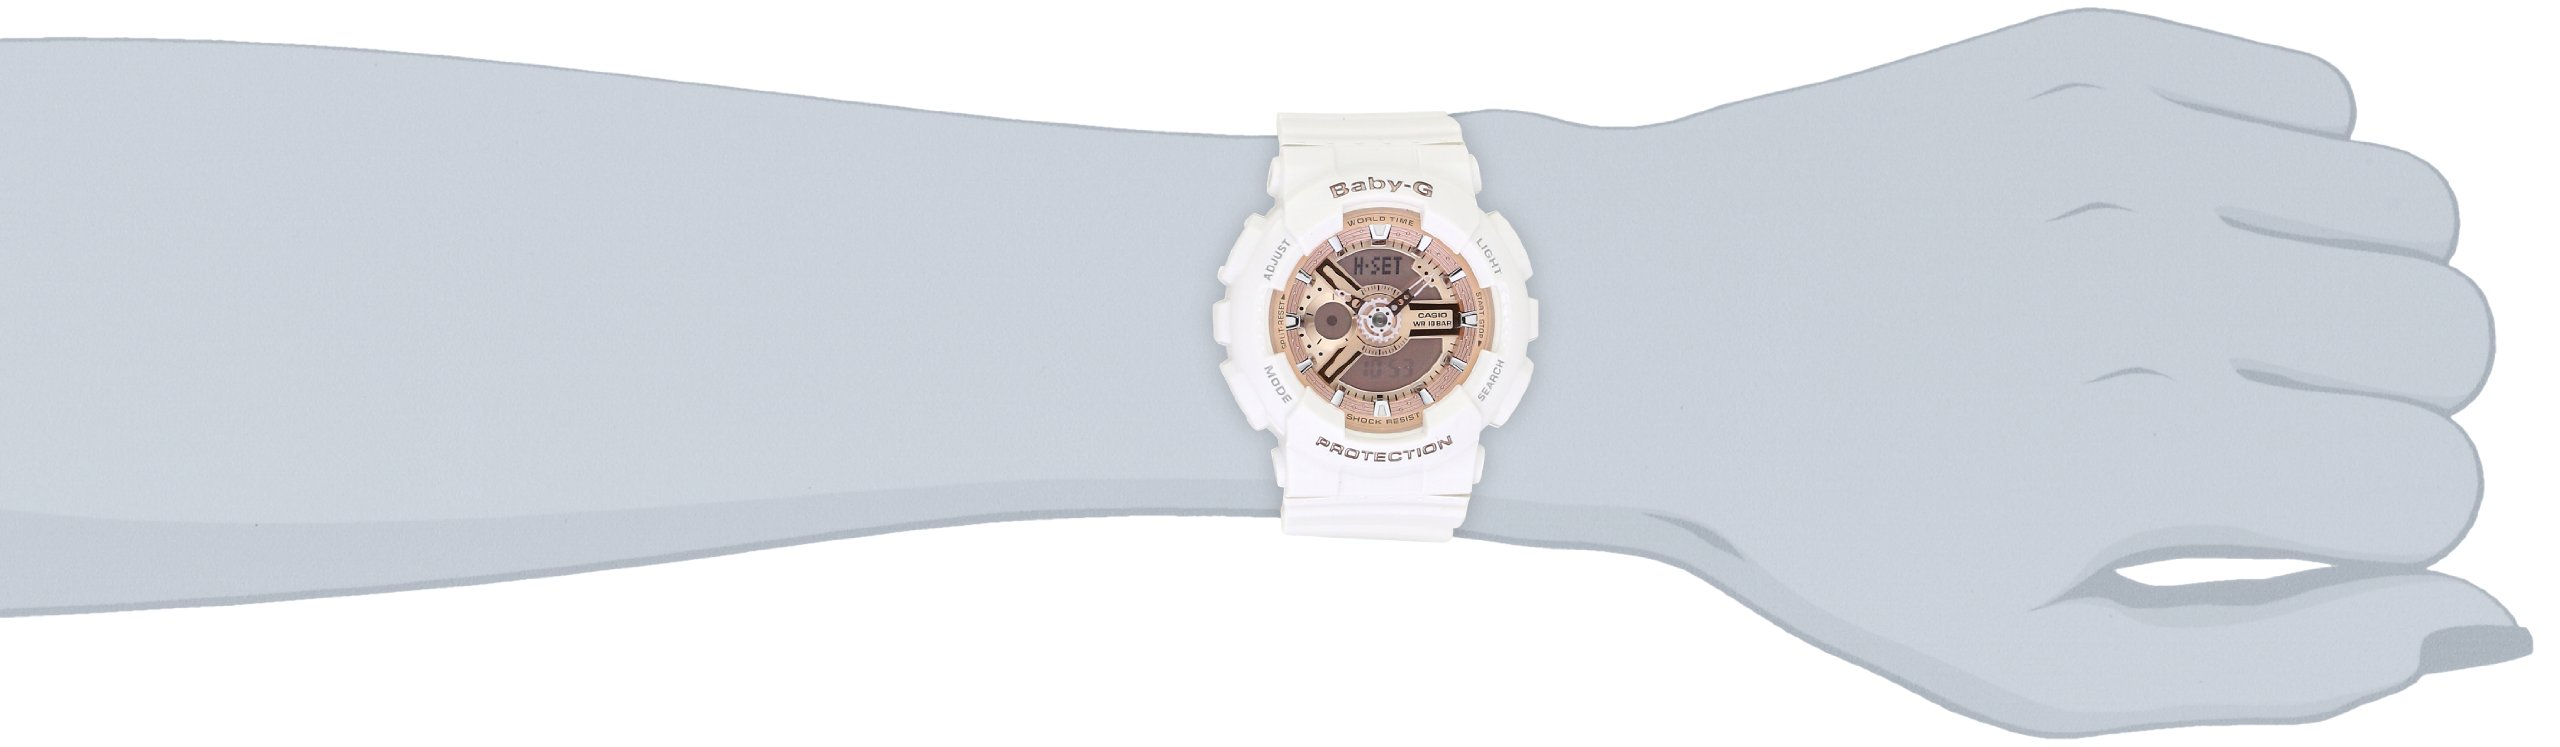 Casio Women's BA-110-7A1CR Baby-G Rose Gold Analog-Digital Watch with White Resin Band